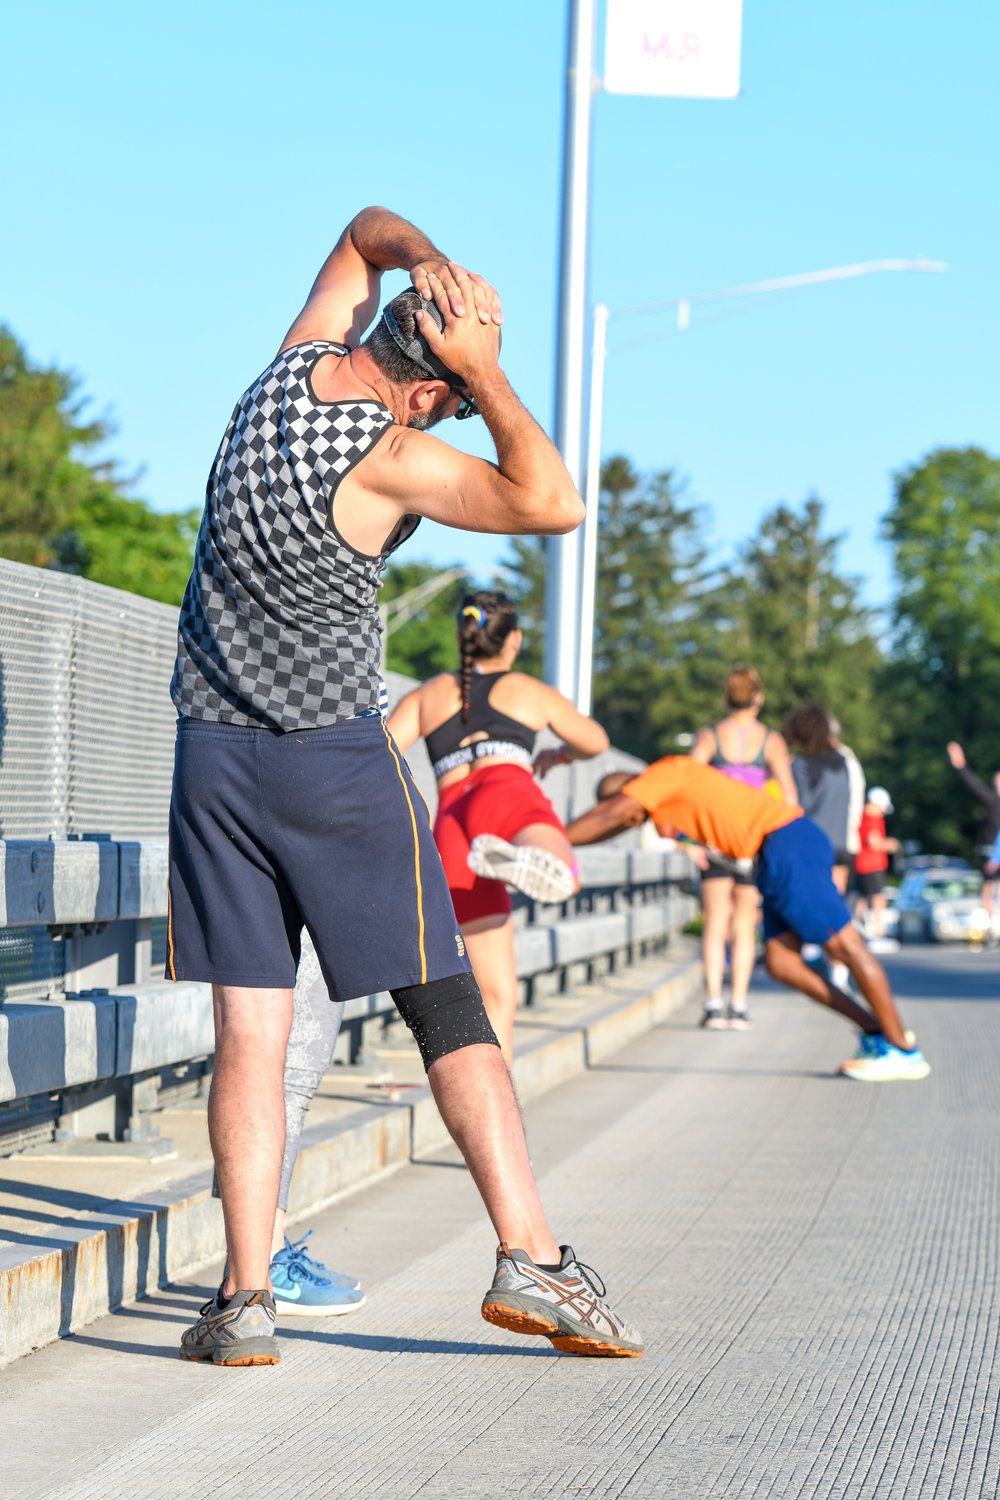 Burrstone Road bridge made for the perfect stretching arena before the 2022 Boilermaker 5K. Many who spoke with the Sentinel didn't describe themselves as athletes — they were just there to have a good time.